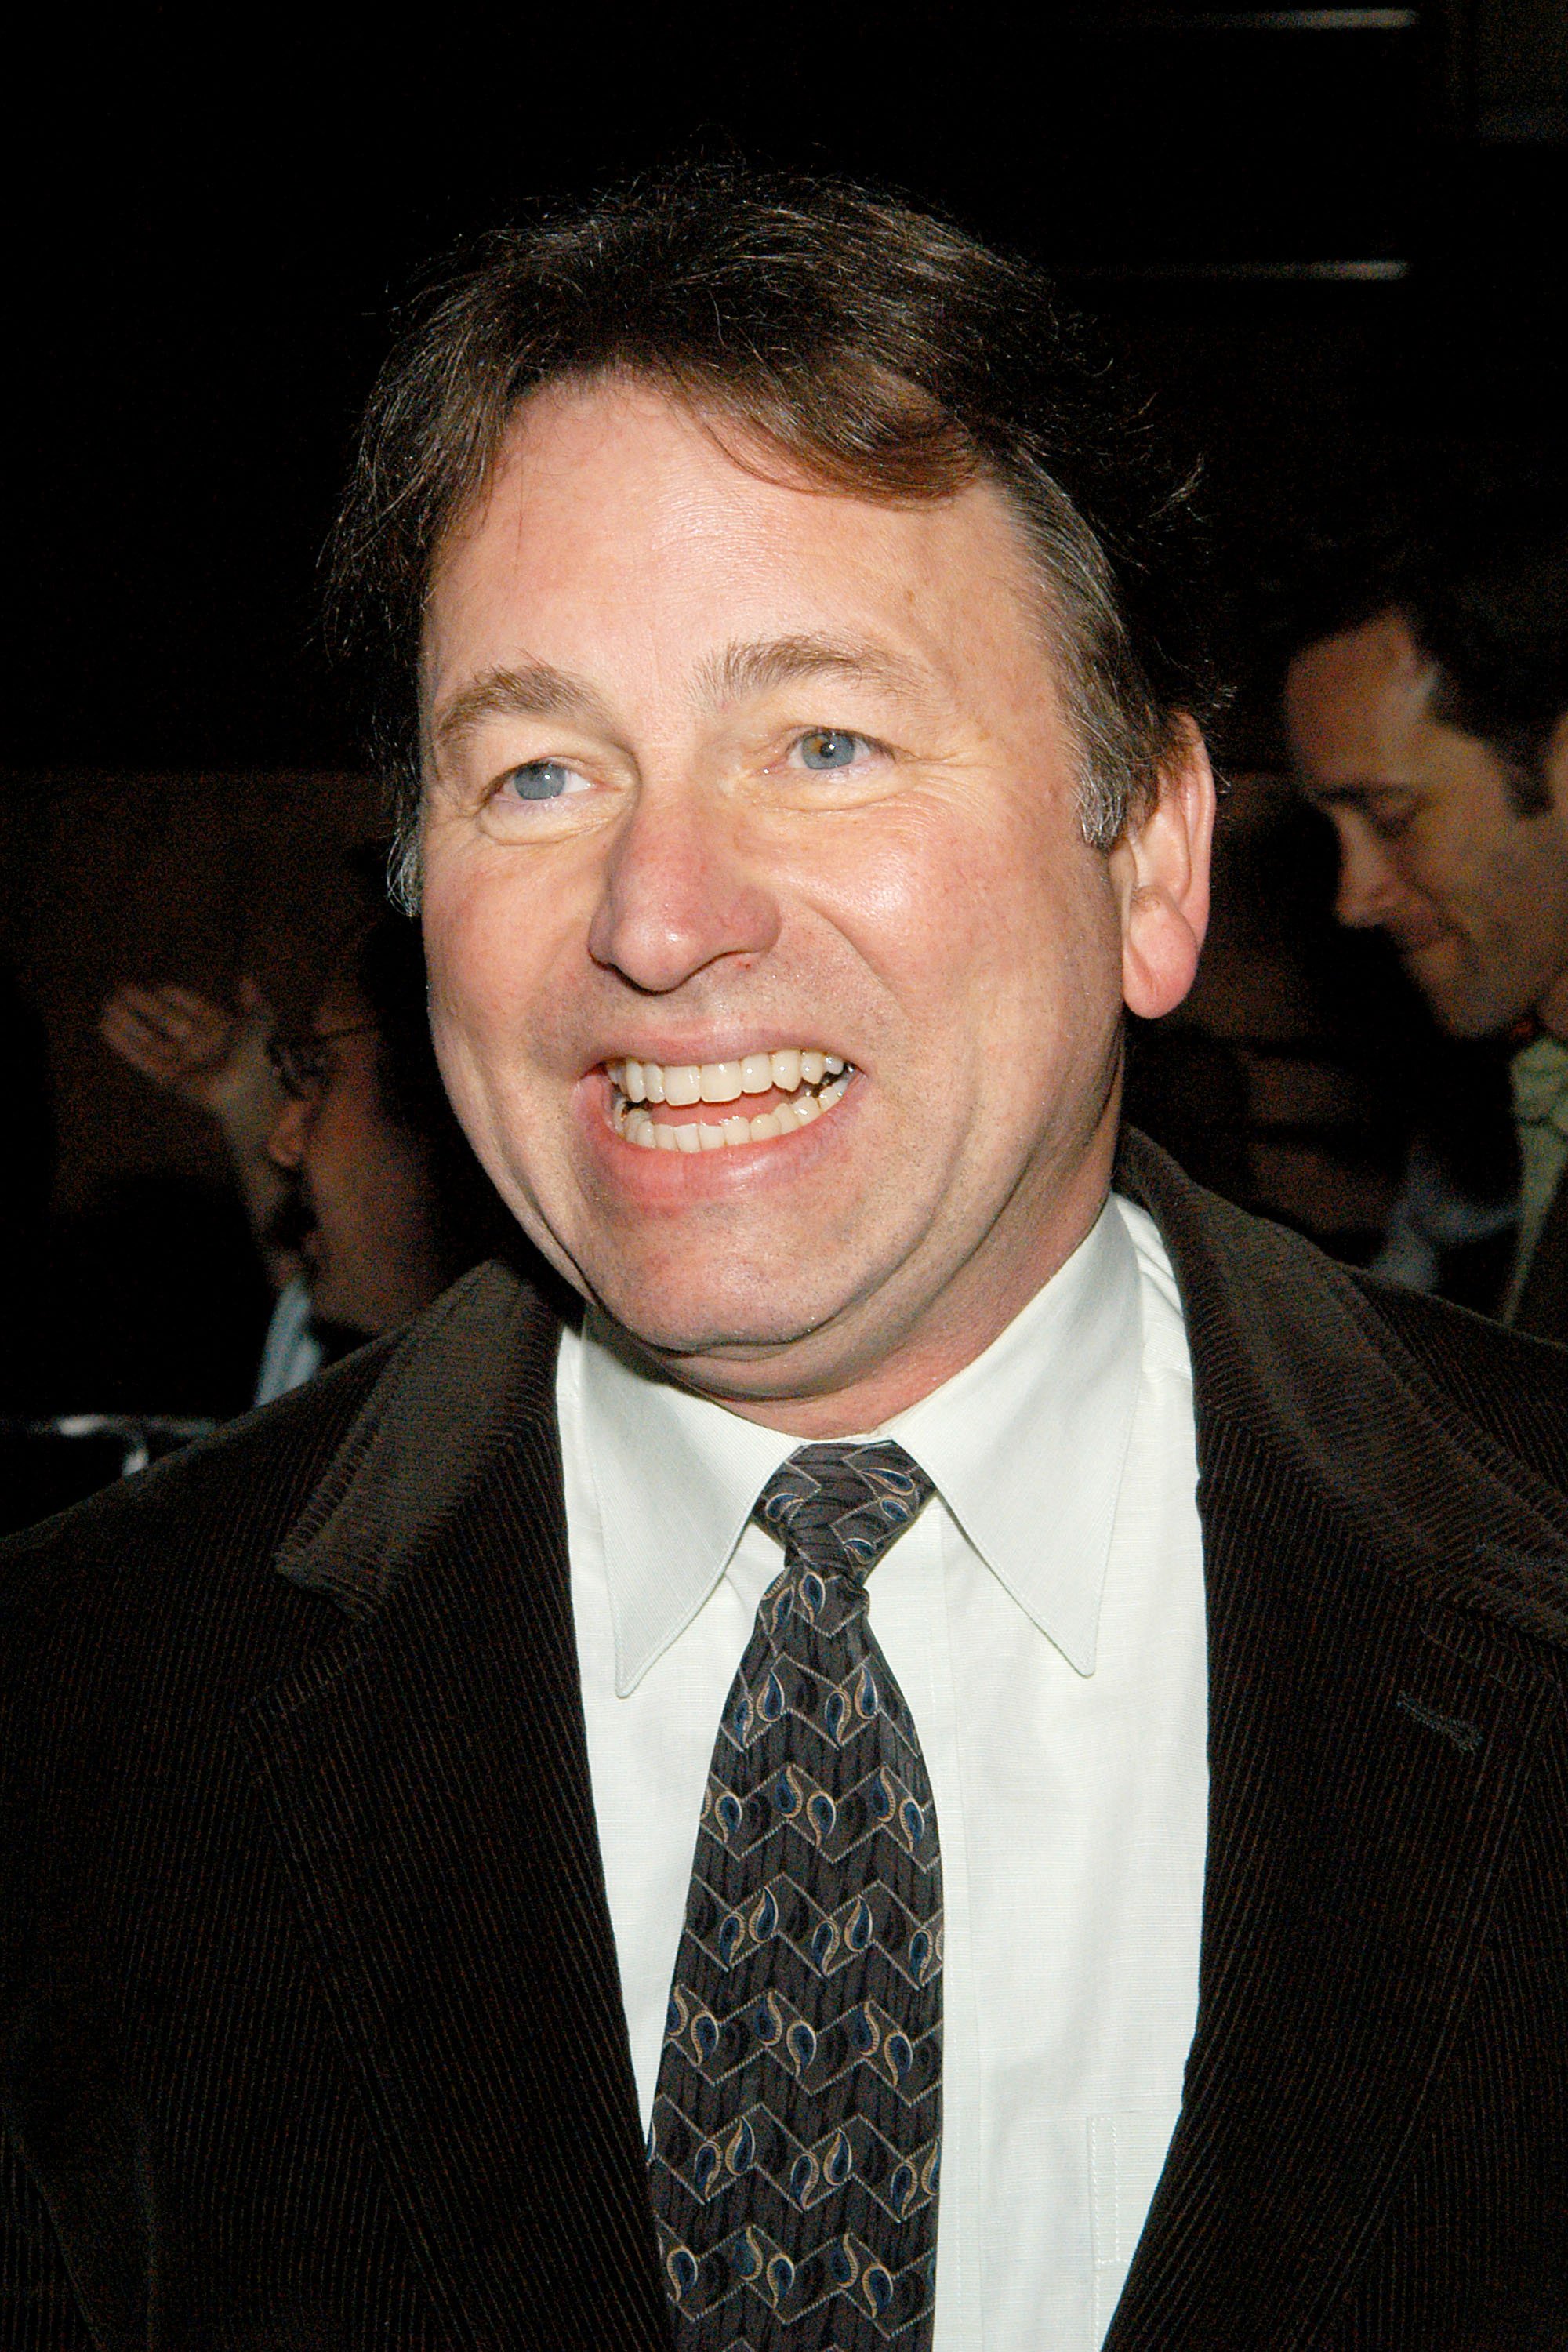 John Ritter at the opening night afterparty for Woody Allen's “Writers Block” on May 15, 2003, in New York City | Photo: Getty Images